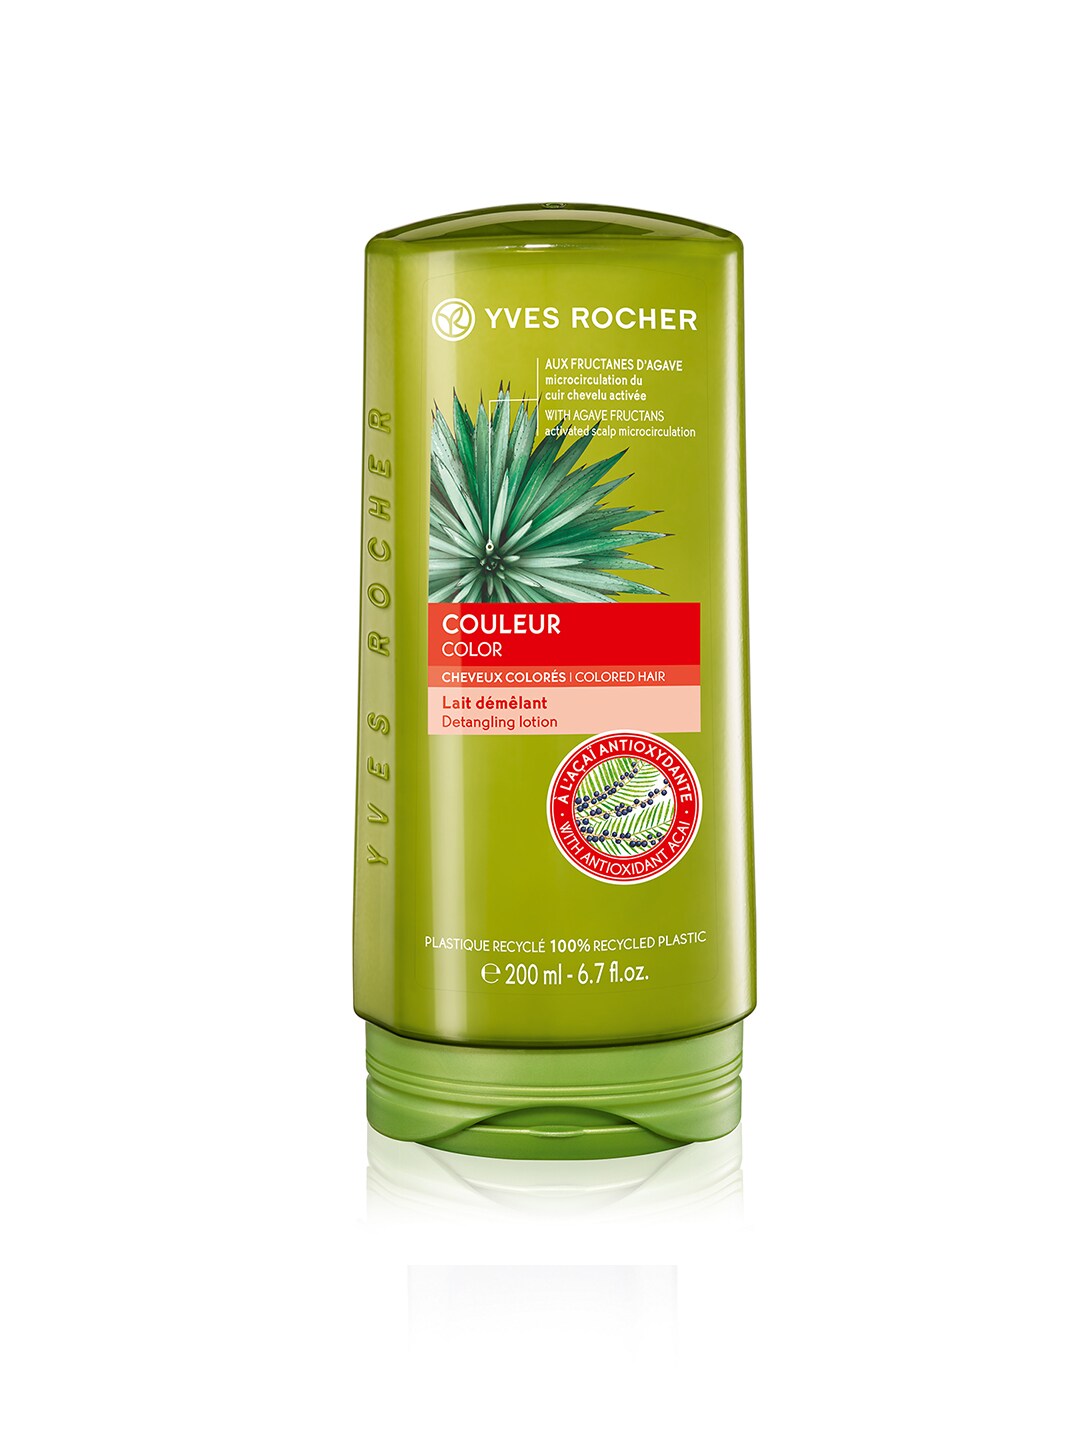 Yves Rocher Colour Detangling Lotion Conditioner 200 ml Price in India